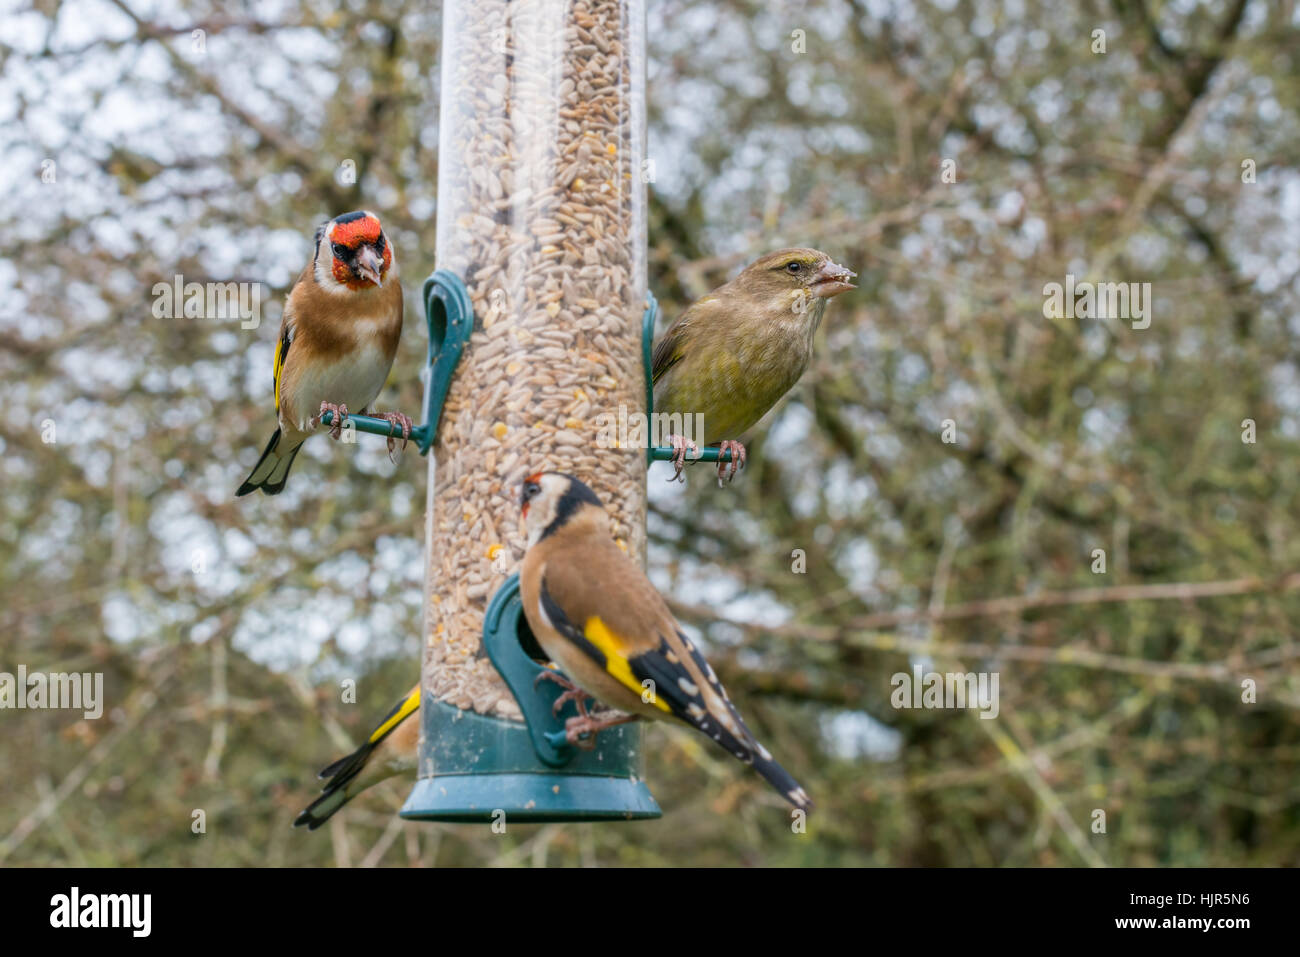 Two species of finch - golfinch (Carduelis carduelis), and greenfinch (Carduelis chloris) on a garden feeder in winter. UK, December Stock Photo